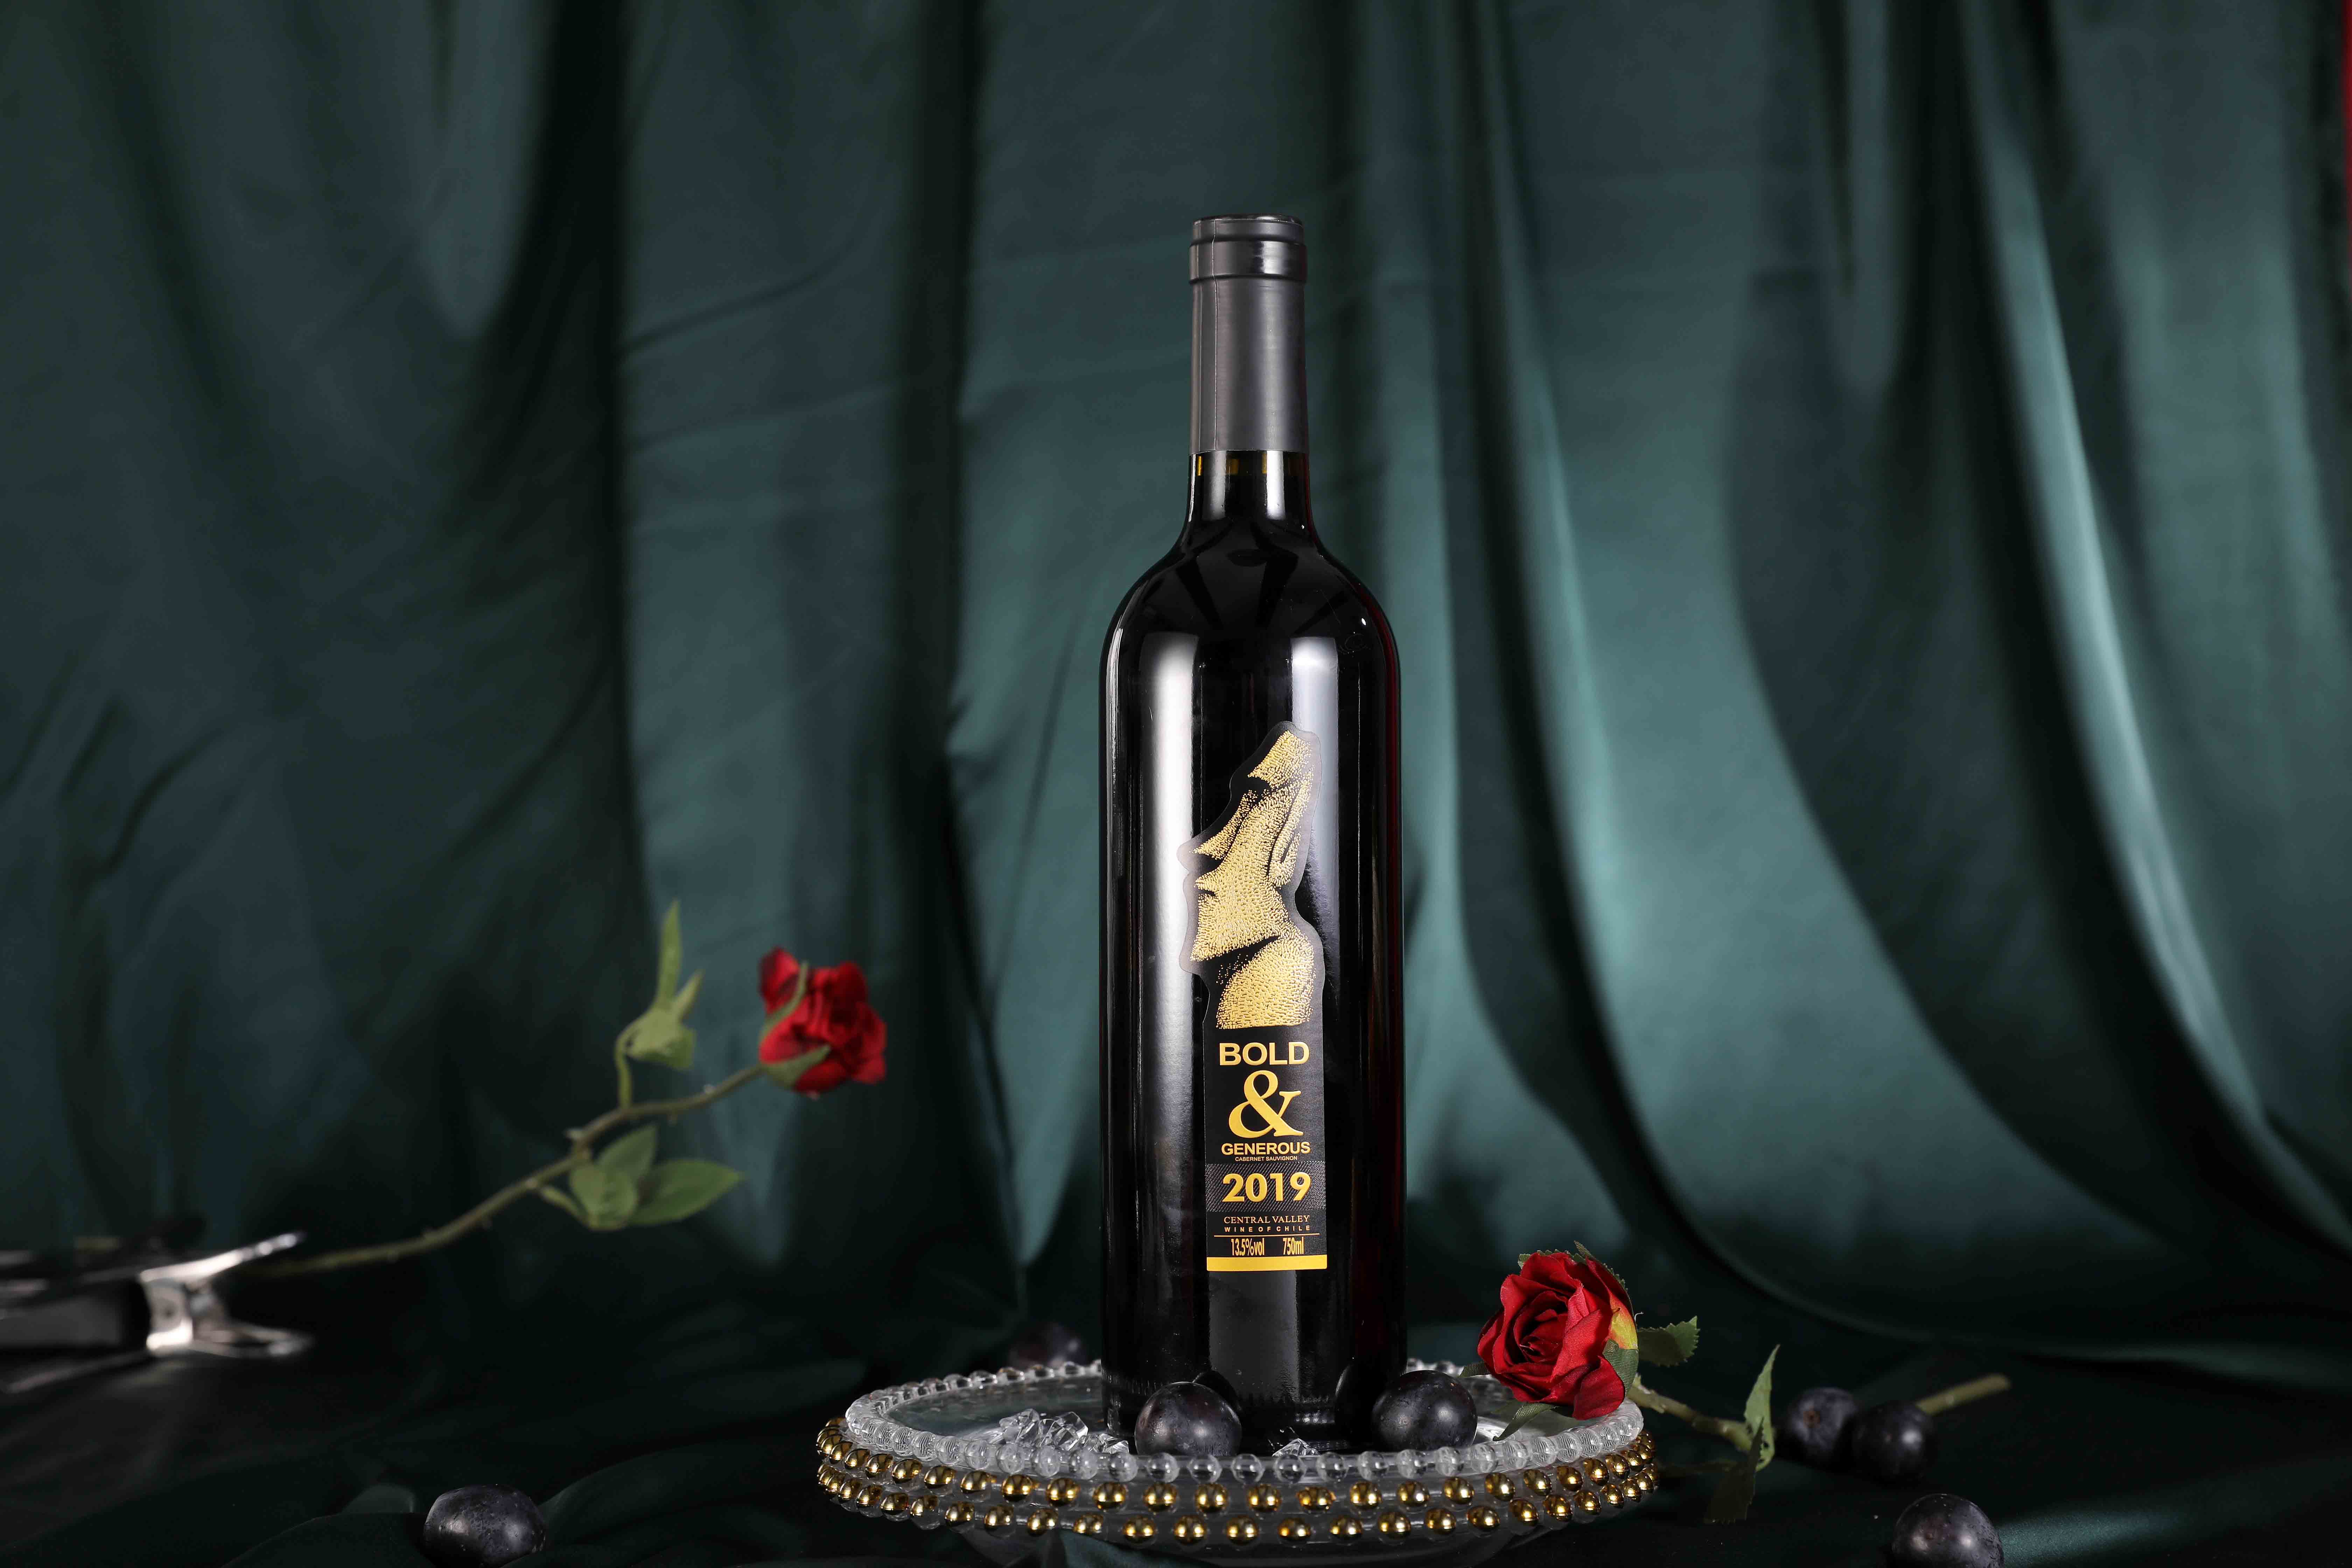 Perfect for banquets! Just choose the Sapai red wine endorsed by Pan Meichen